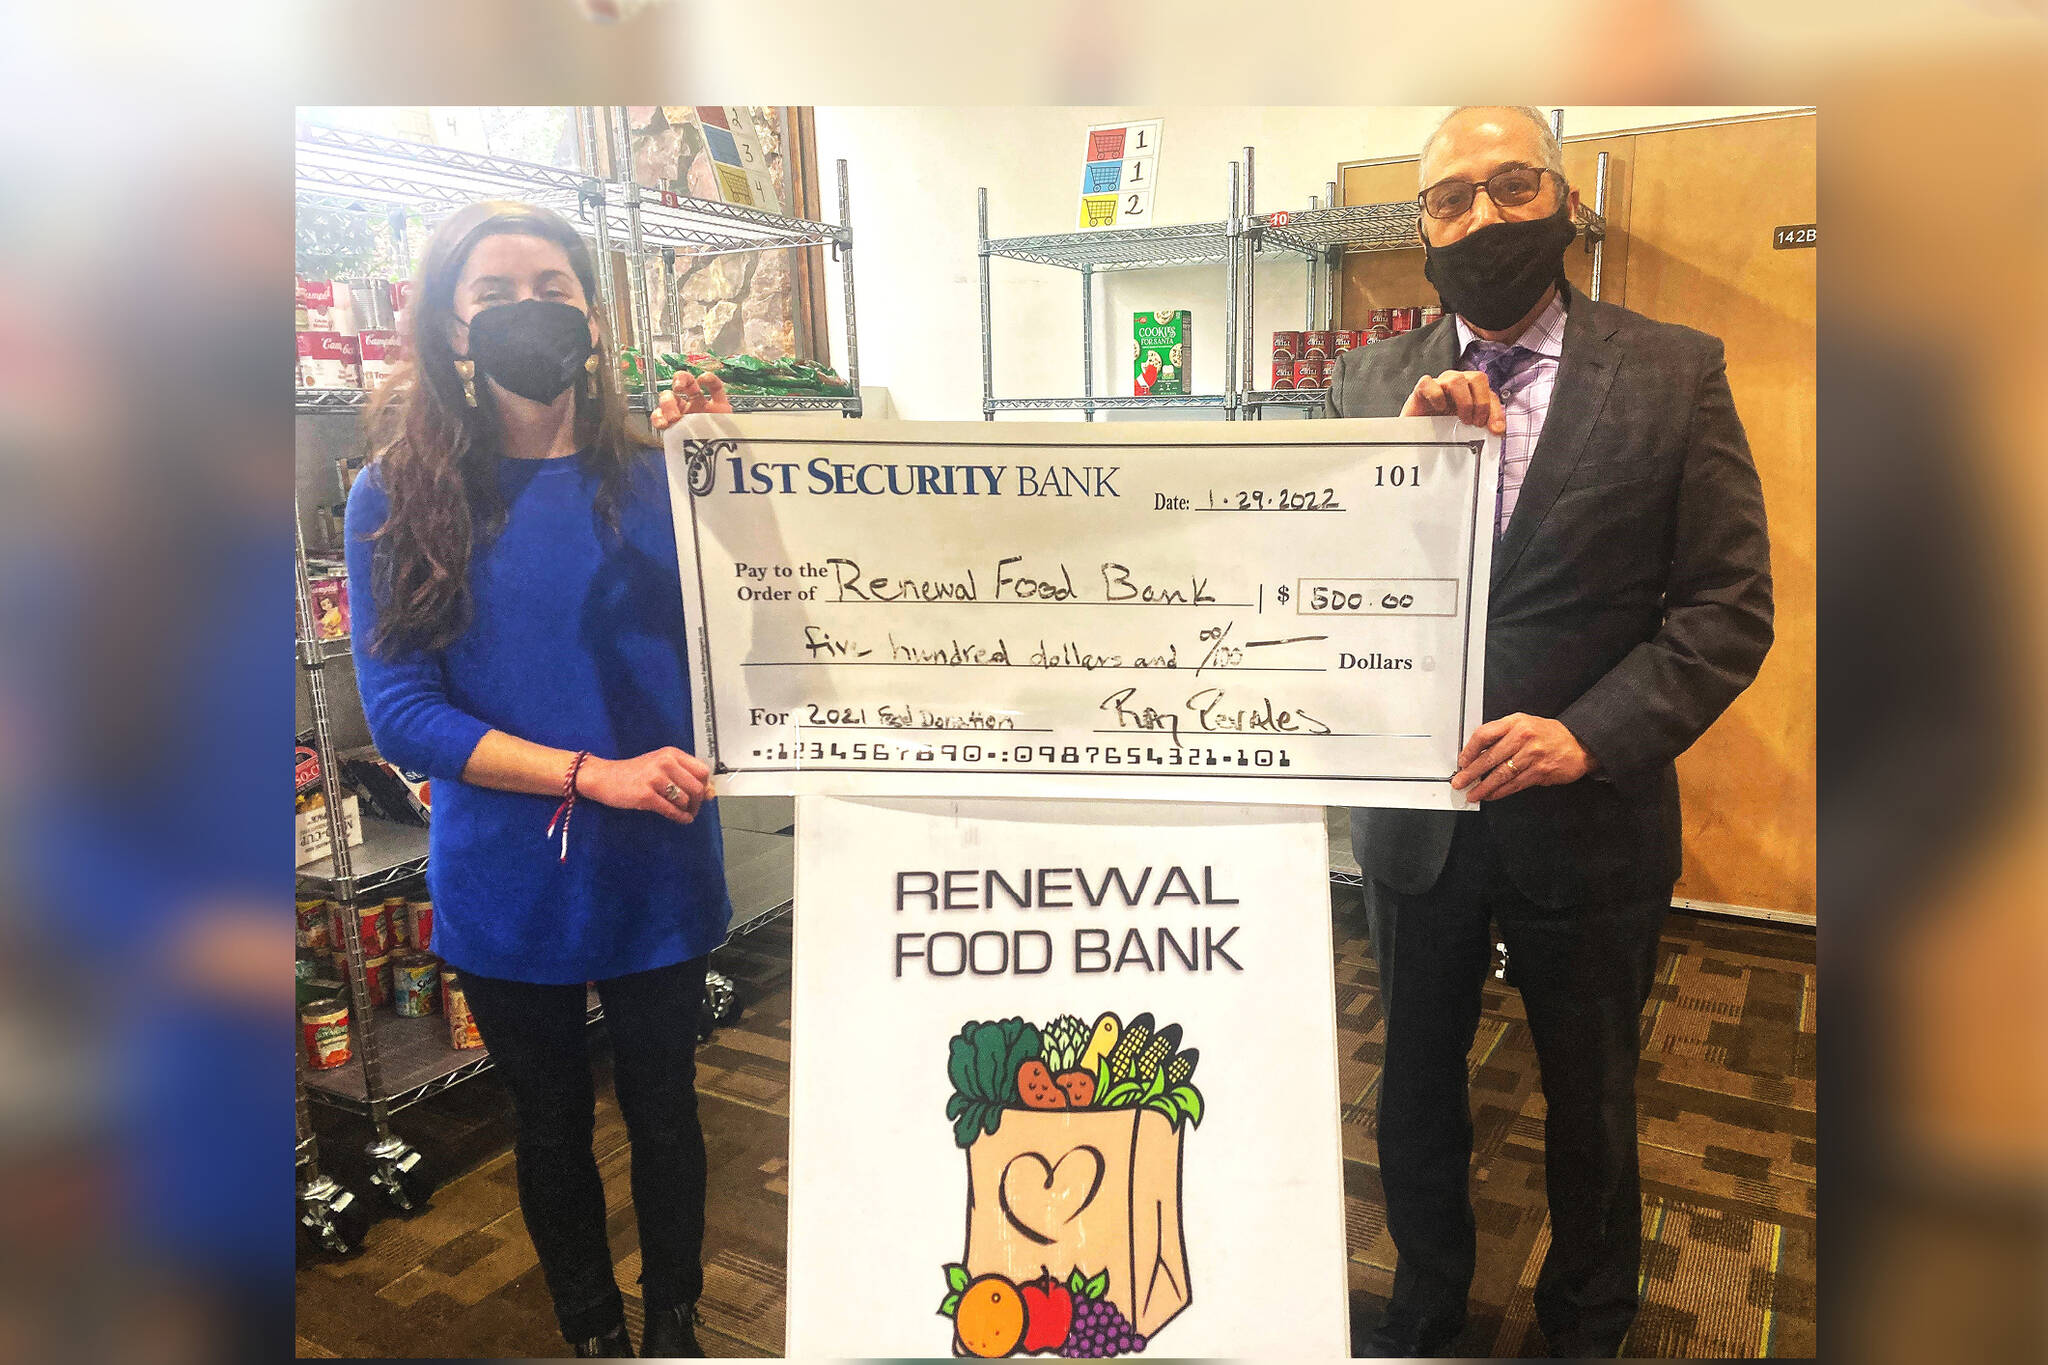 Through volunteerism and and financial support, 1st Security Bank regularly gives back to its community, including donating more than $200,000 to food banks in their branch footprint last year, including Redmond’s Renewal Food Bank.